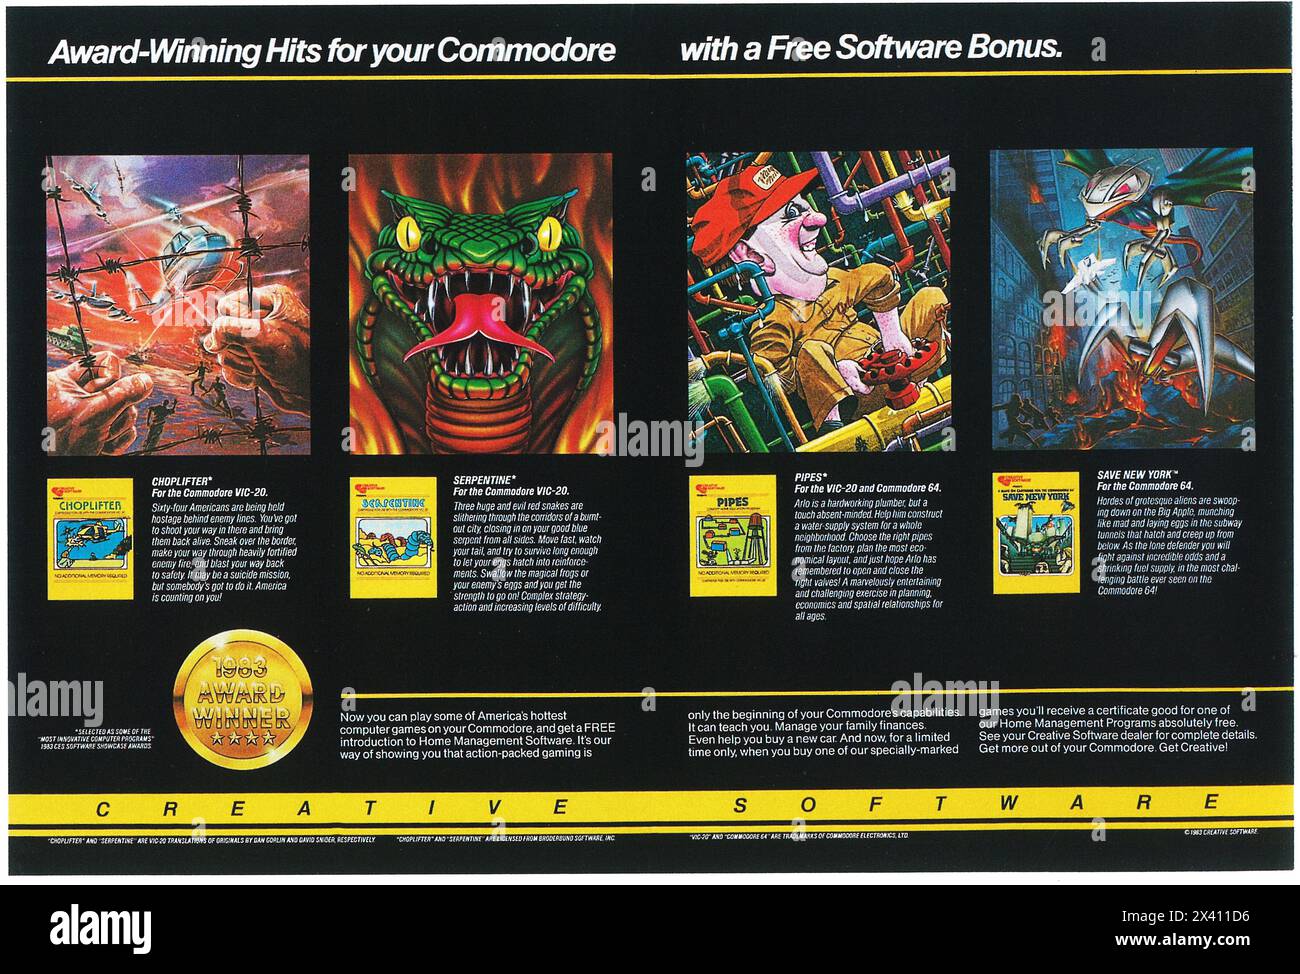 1983 Commodore Computer Games Ad- Creative software- Choplifter, Serpentine, Pipes, Save New York Stock Photo